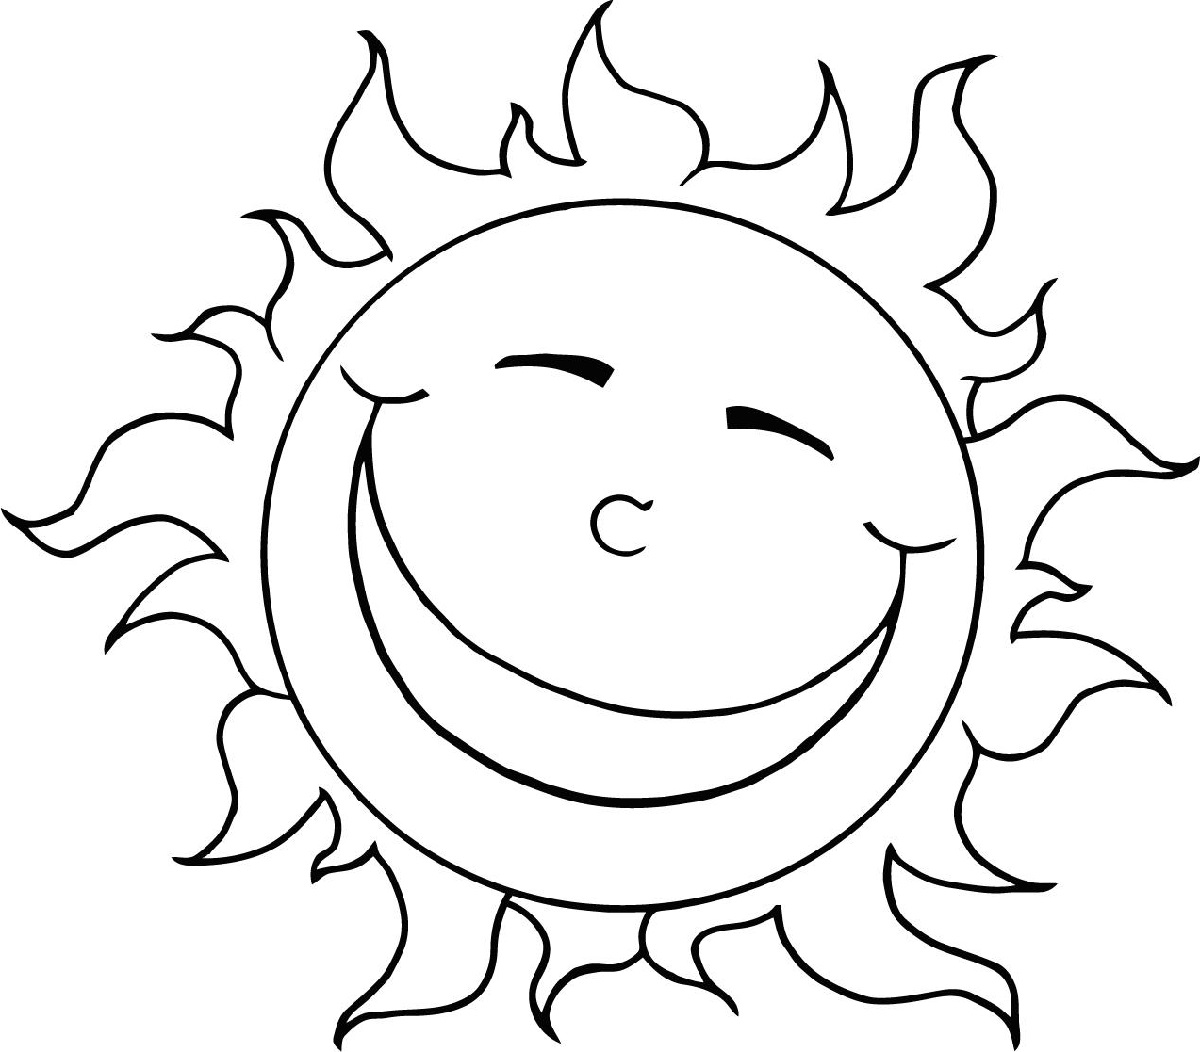 get-our-sun-coloring-page-educative-printable